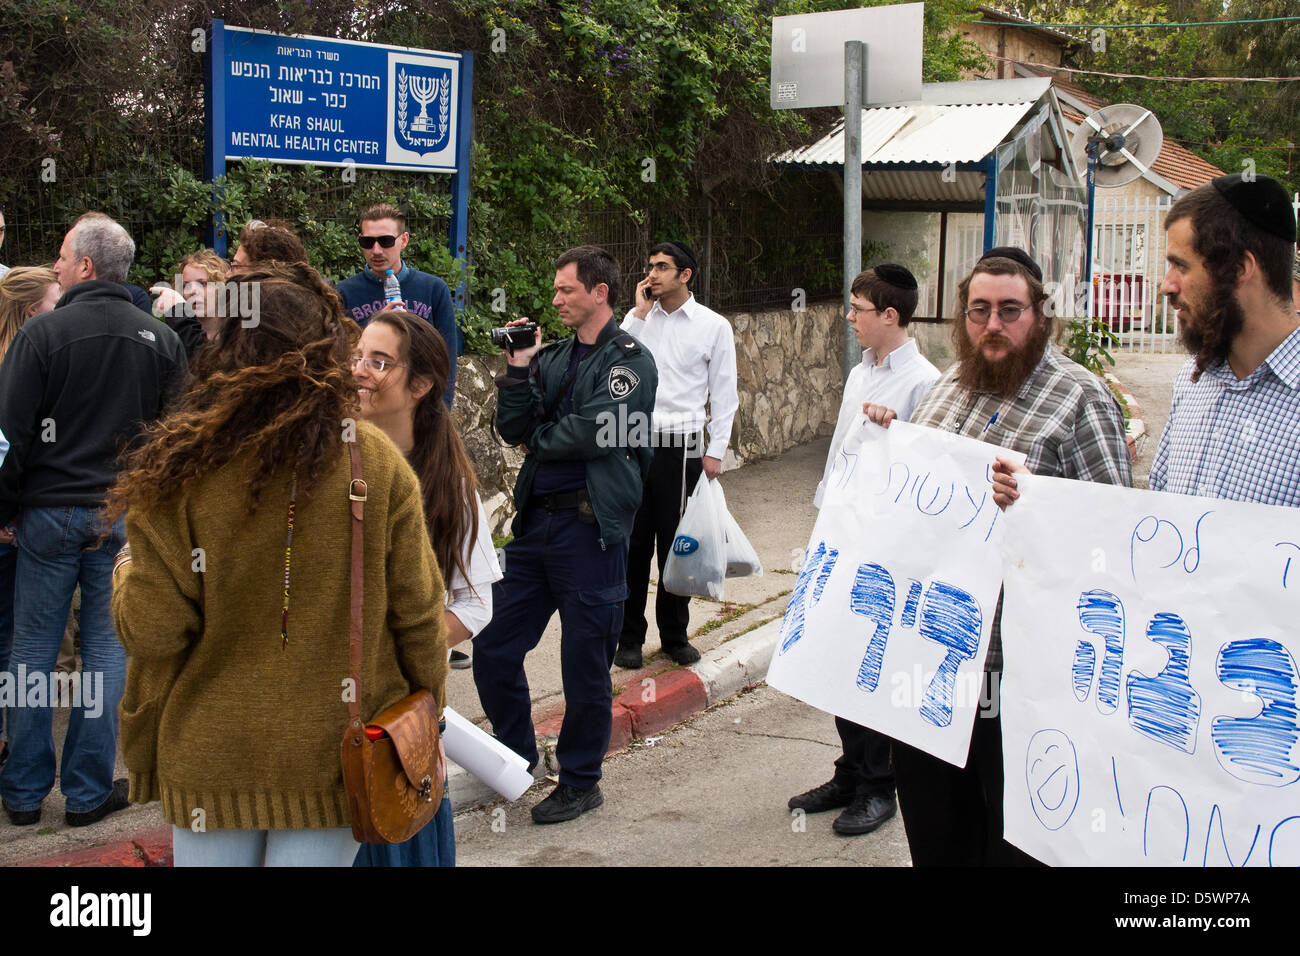 Jerusalem, Israel. 9-Apr-2013. Jewish right-wing activists, lead by Baruch Marzel, disrupt a commemoration procession through the historical village of Deir Yassin, organized by Zochrot (Remembering), seeking to raise public awareness of the Palestinian Nakba (Catastrophe).     Deir Yassin, a pre-1948 Arab village adjacent to Jerusalem with a population of about 600, was invaded by paramilitaries from the Jewish Irgun and Lehi groups on April 9, 1948 and around 115 villagers were massacred. Credit: Nir Alon/Alamy Live News Stock Photo